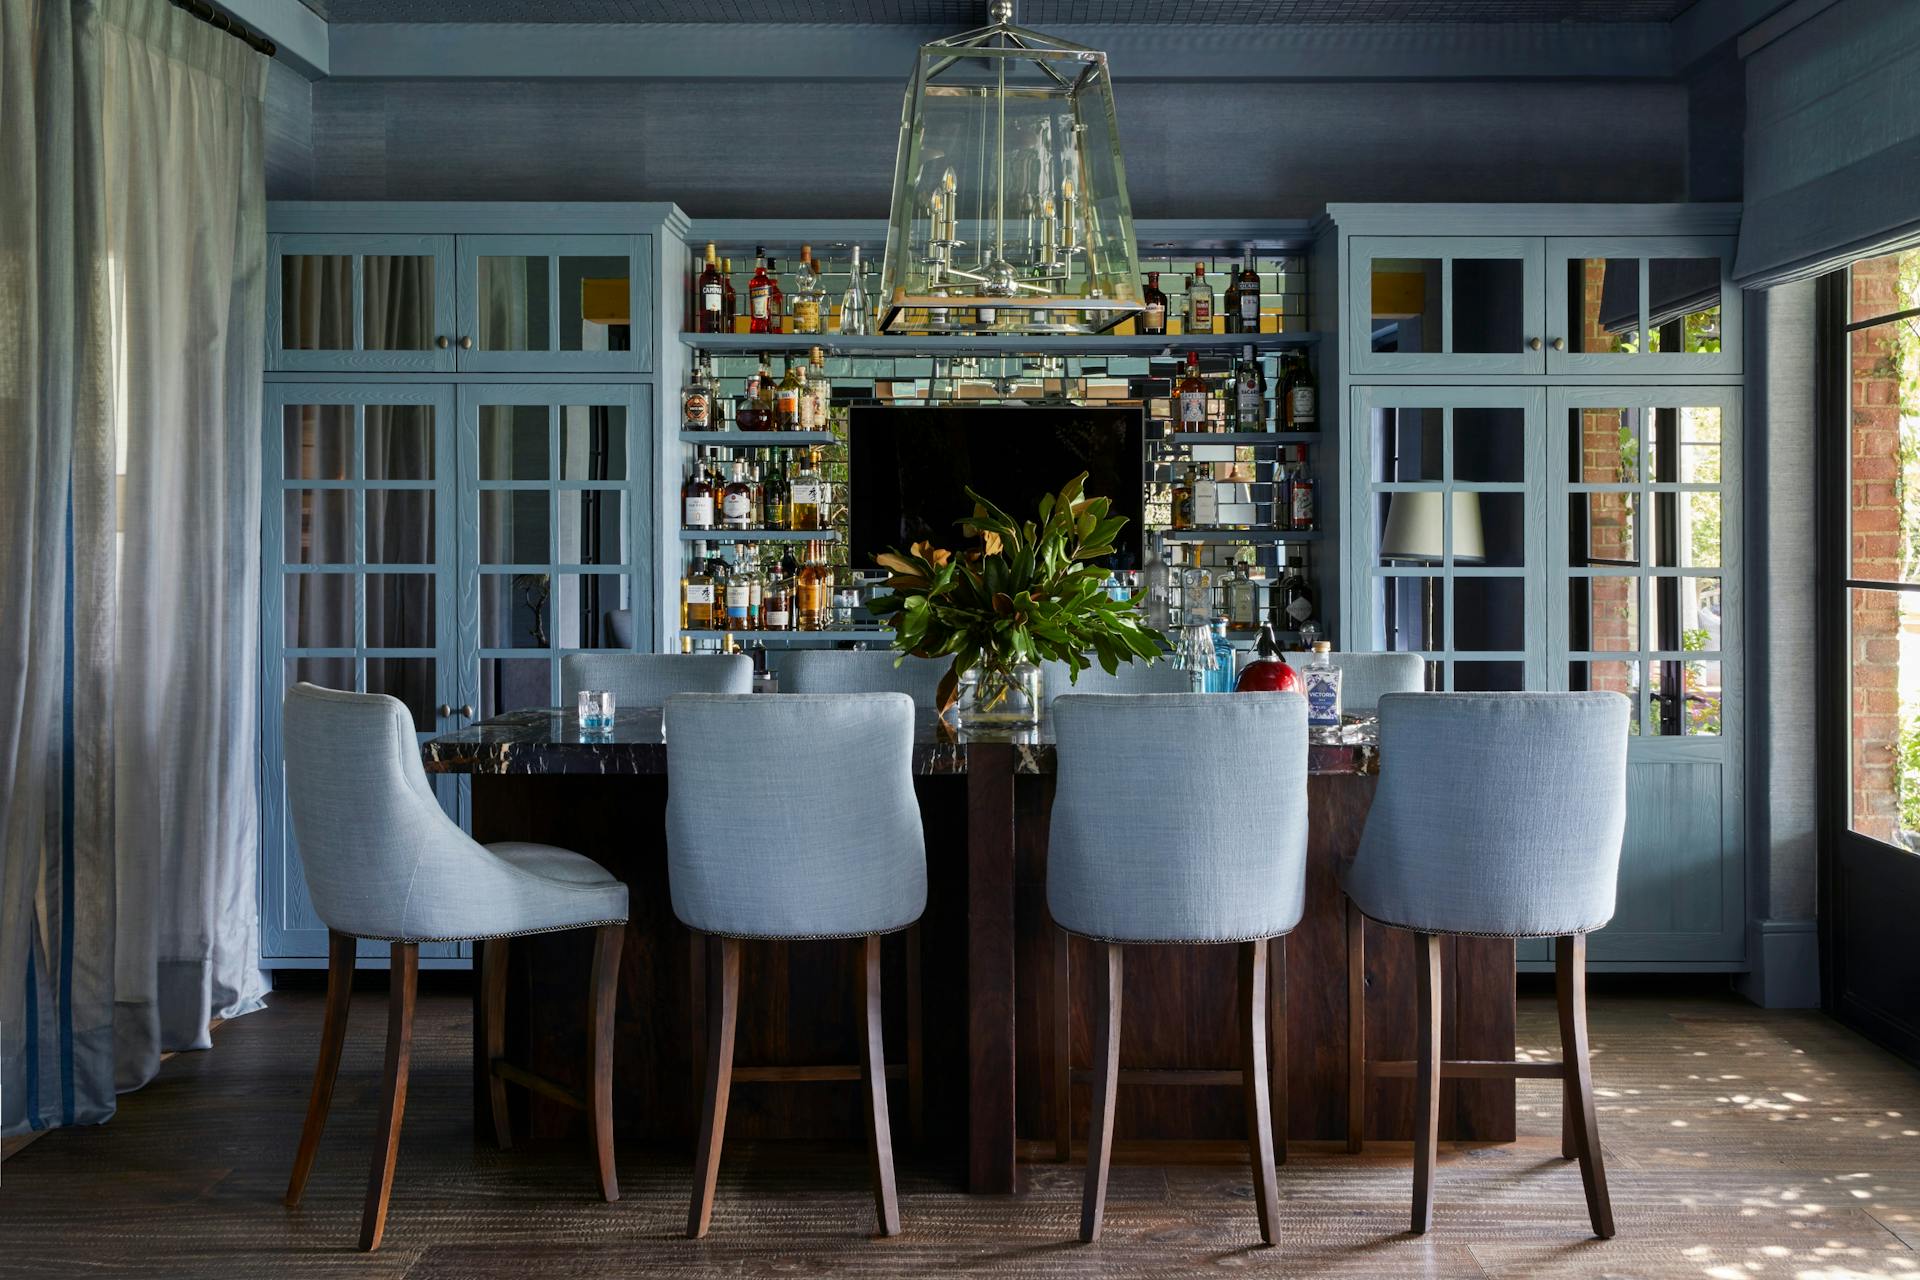 Four blue-upholstered bar chairs sit in front of a wooden bar counter holding a large glass vase of greenery. Under a central, angular hanging light fitting, the bar walls accommodates four shelves of liquor bottles, with large, glass-paned doors to the left and right